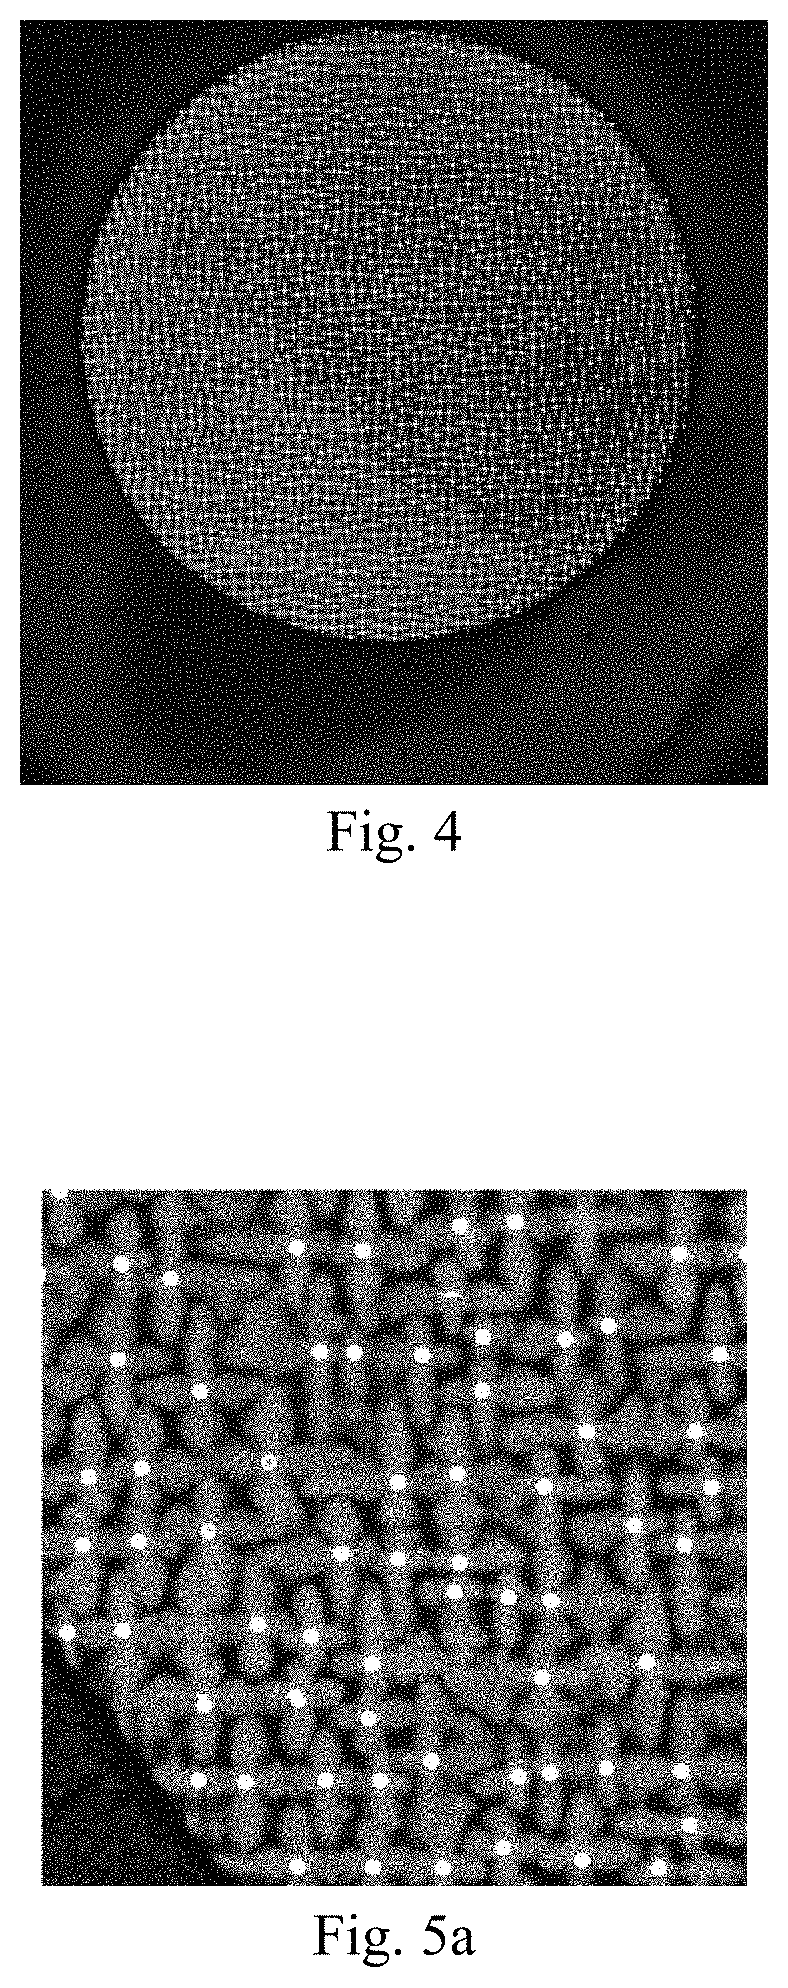 Apparatus and method for large-scale high throughput quantitative characterization and three-dimensional reconstruction of material structure